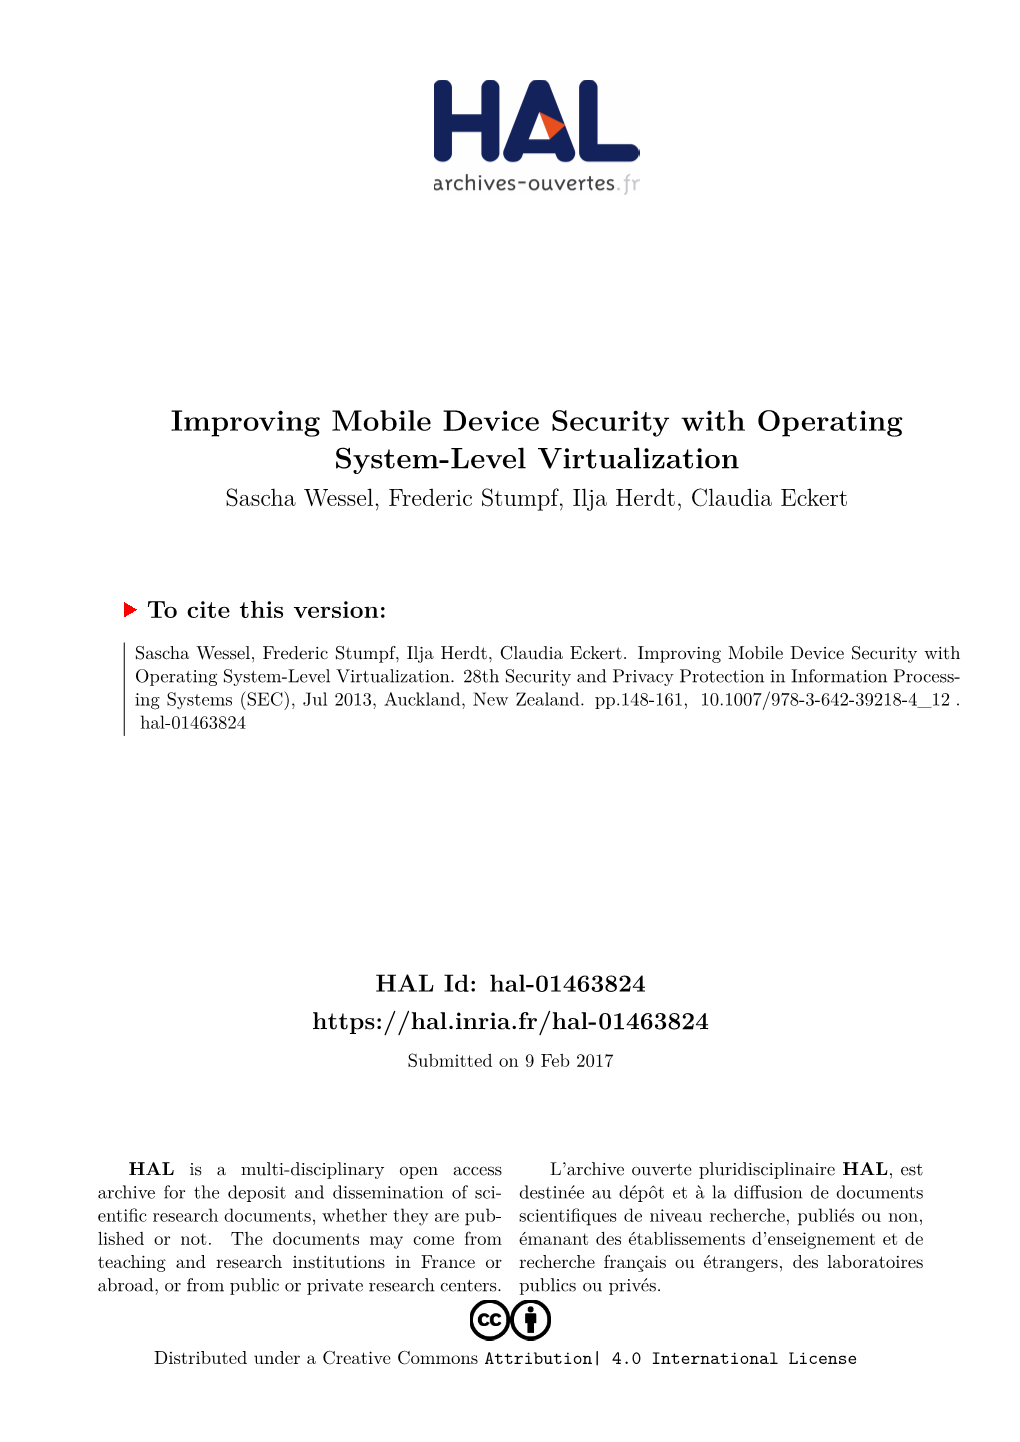 Improving Mobile Device Security with Operating System-Level Virtualization Sascha Wessel, Frederic Stumpf, Ilja Herdt, Claudia Eckert